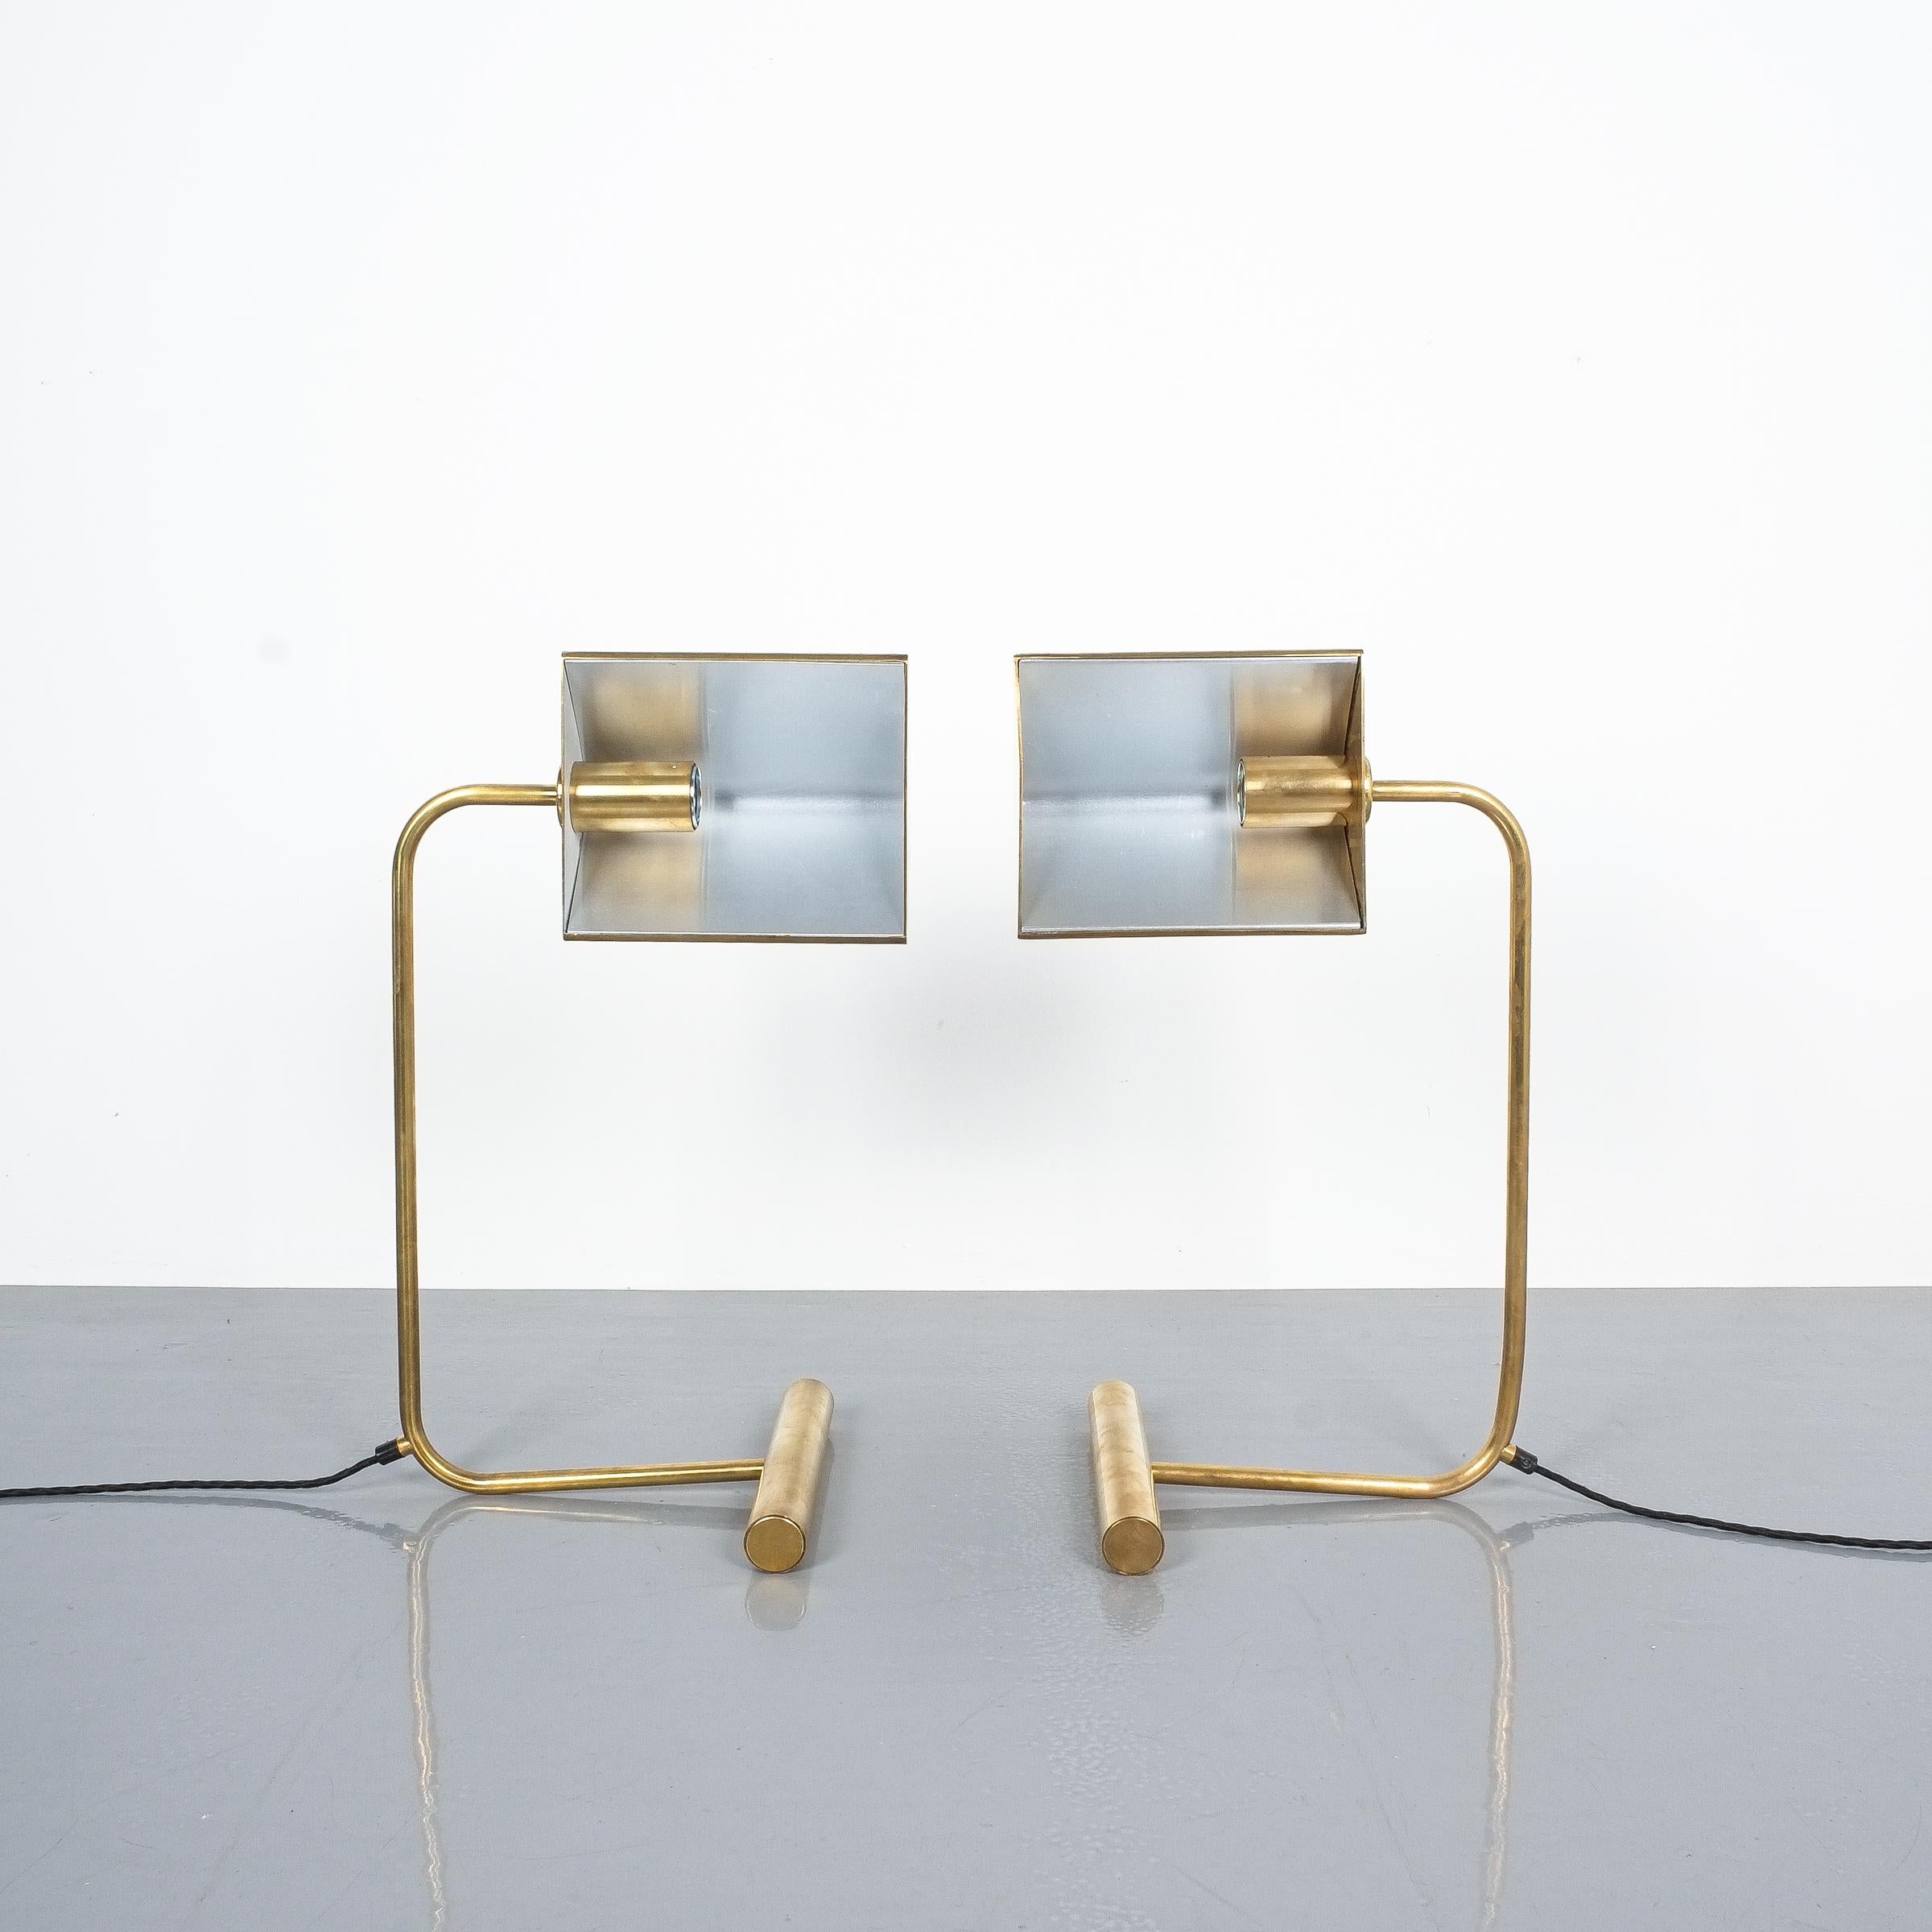 Metal Pair of Desk Lamps Attributed to Koch & Lowy